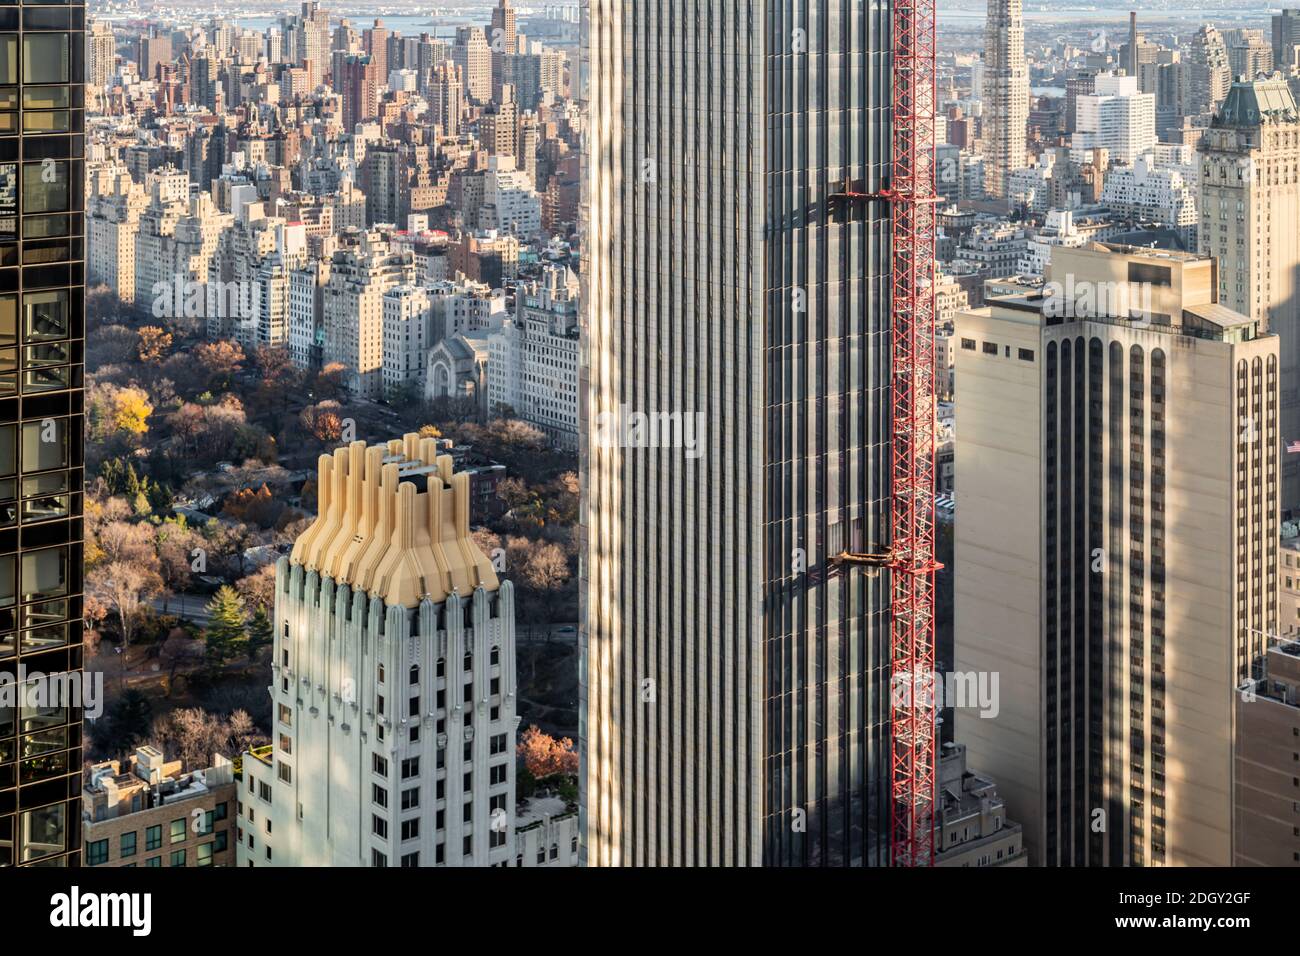 Aerial image of a section of 111 West 57th Street and surrounding area, New York, NY Stock Photo